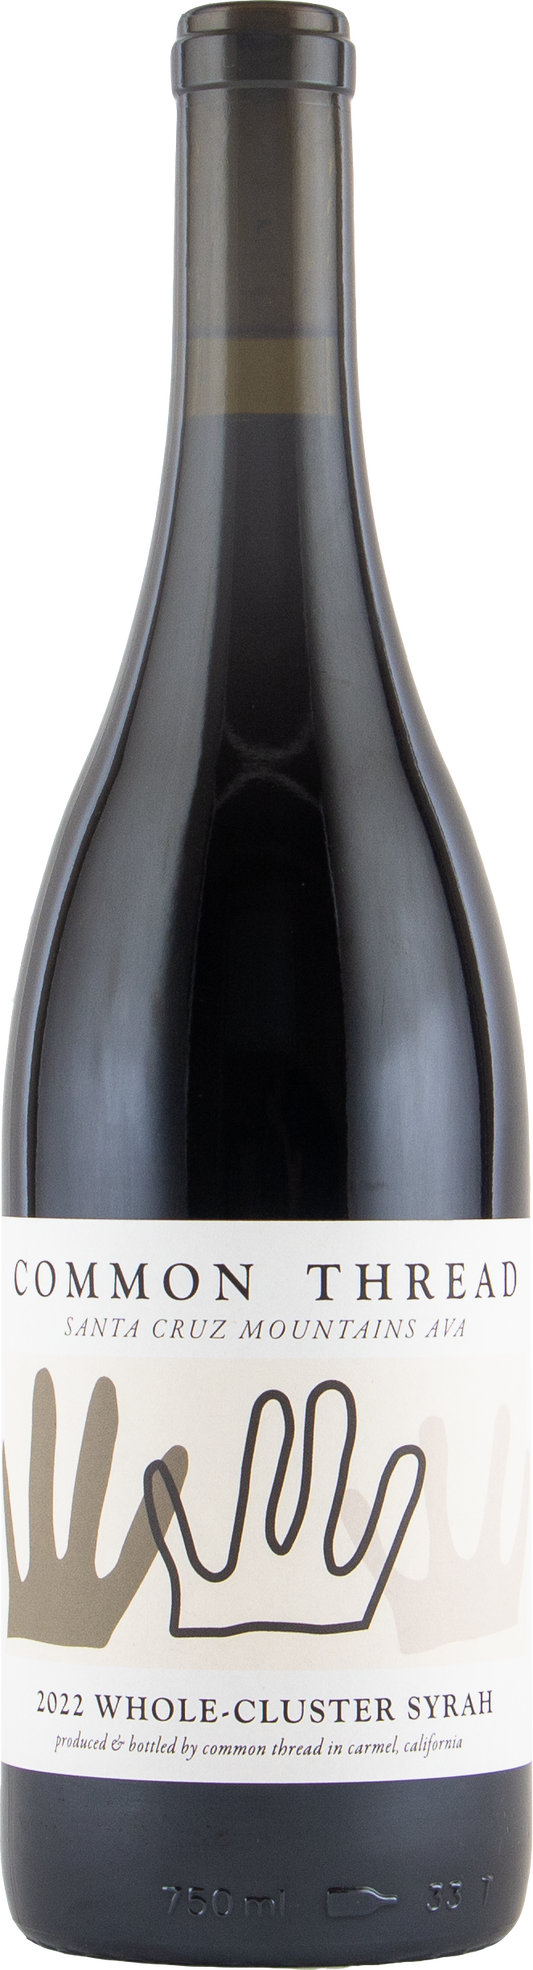 Whole-Cluster Syrah